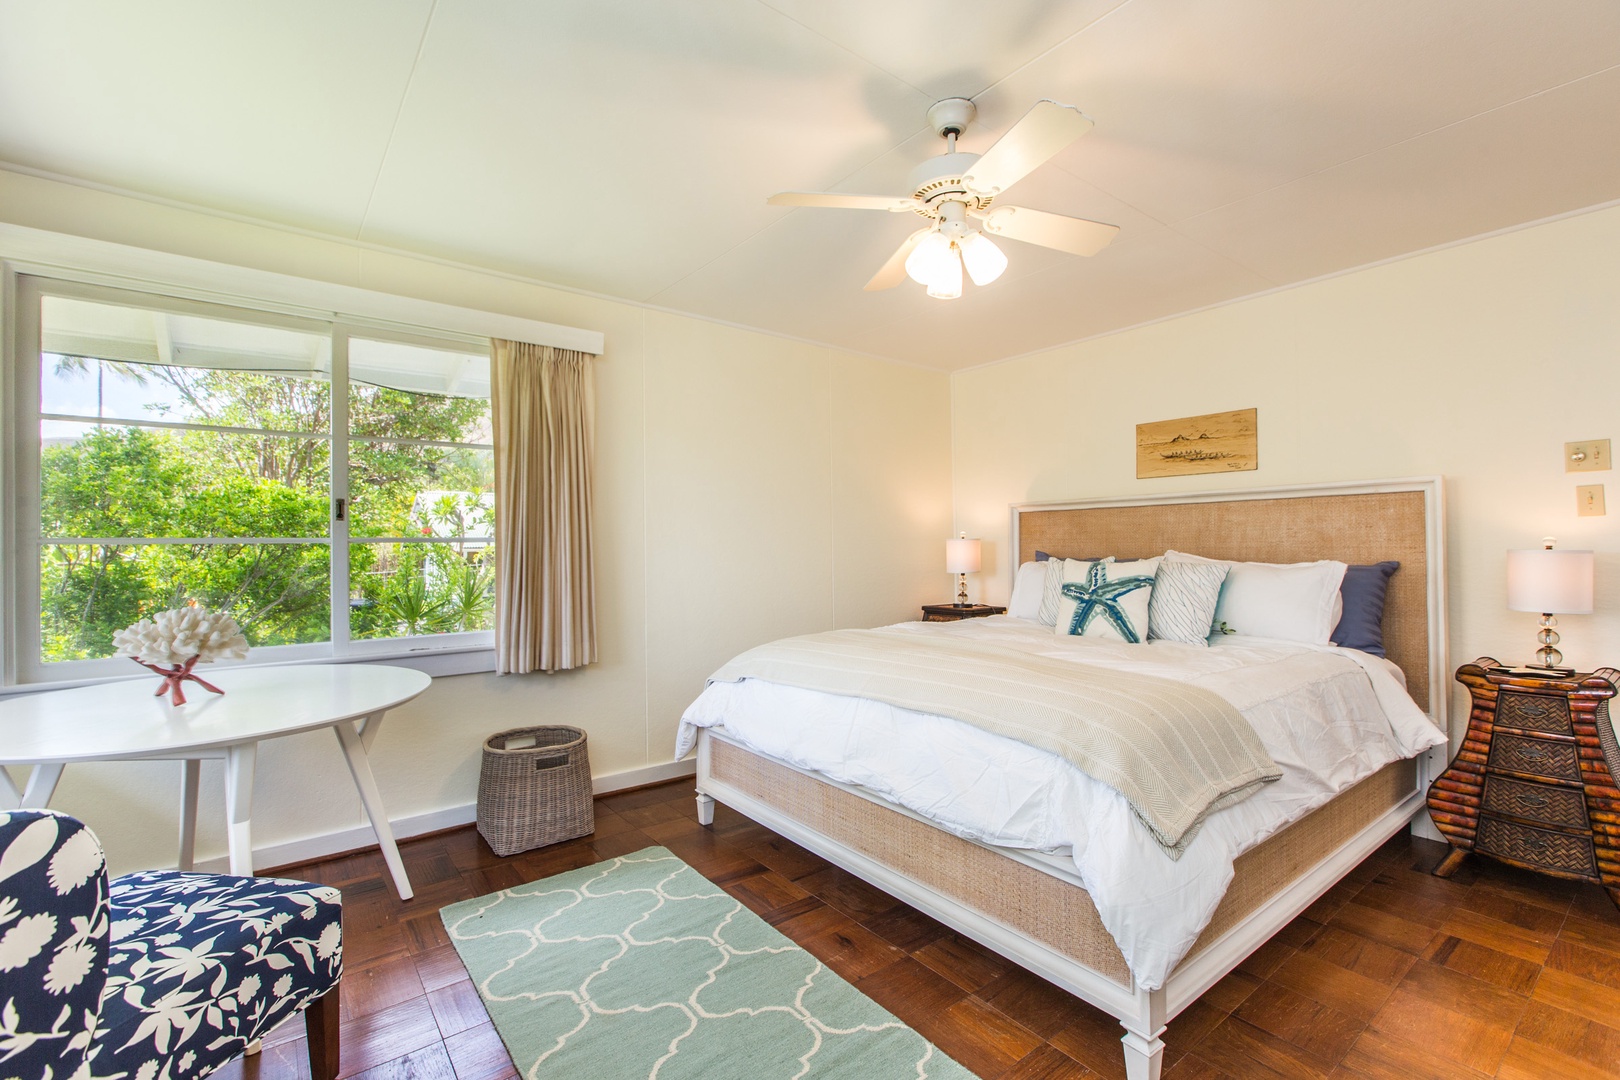 Kailua Vacation Rentals, Lanikai Cottage - Primary, with king bed.